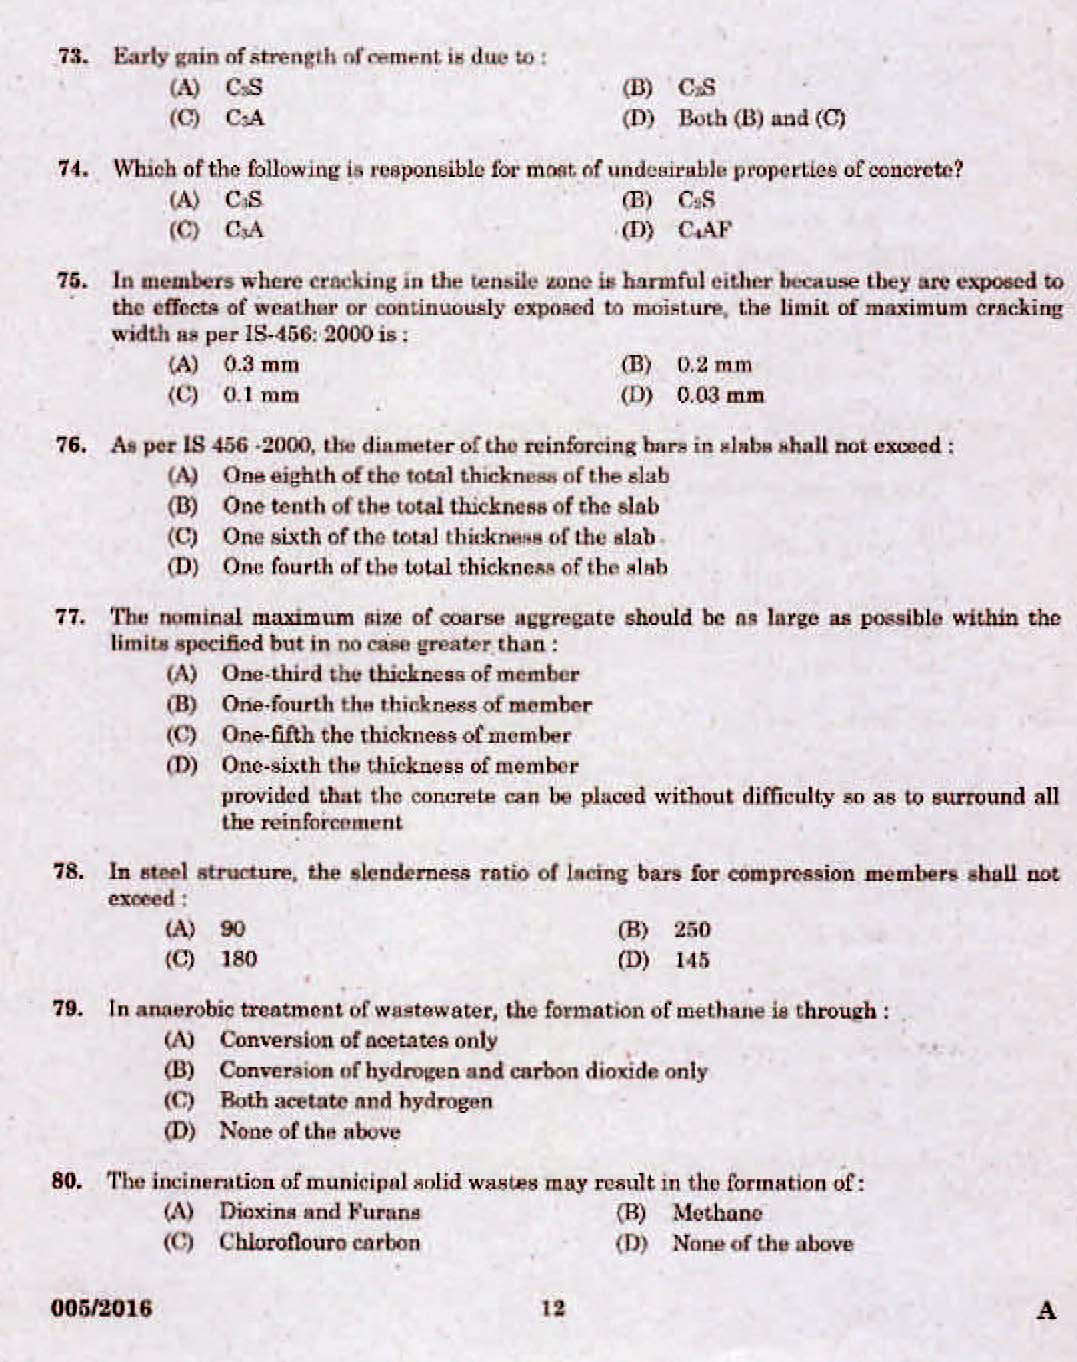 Kerala PSC Assistant Engineer Electrical Exam 2016 Question Paper Code 0052016 10